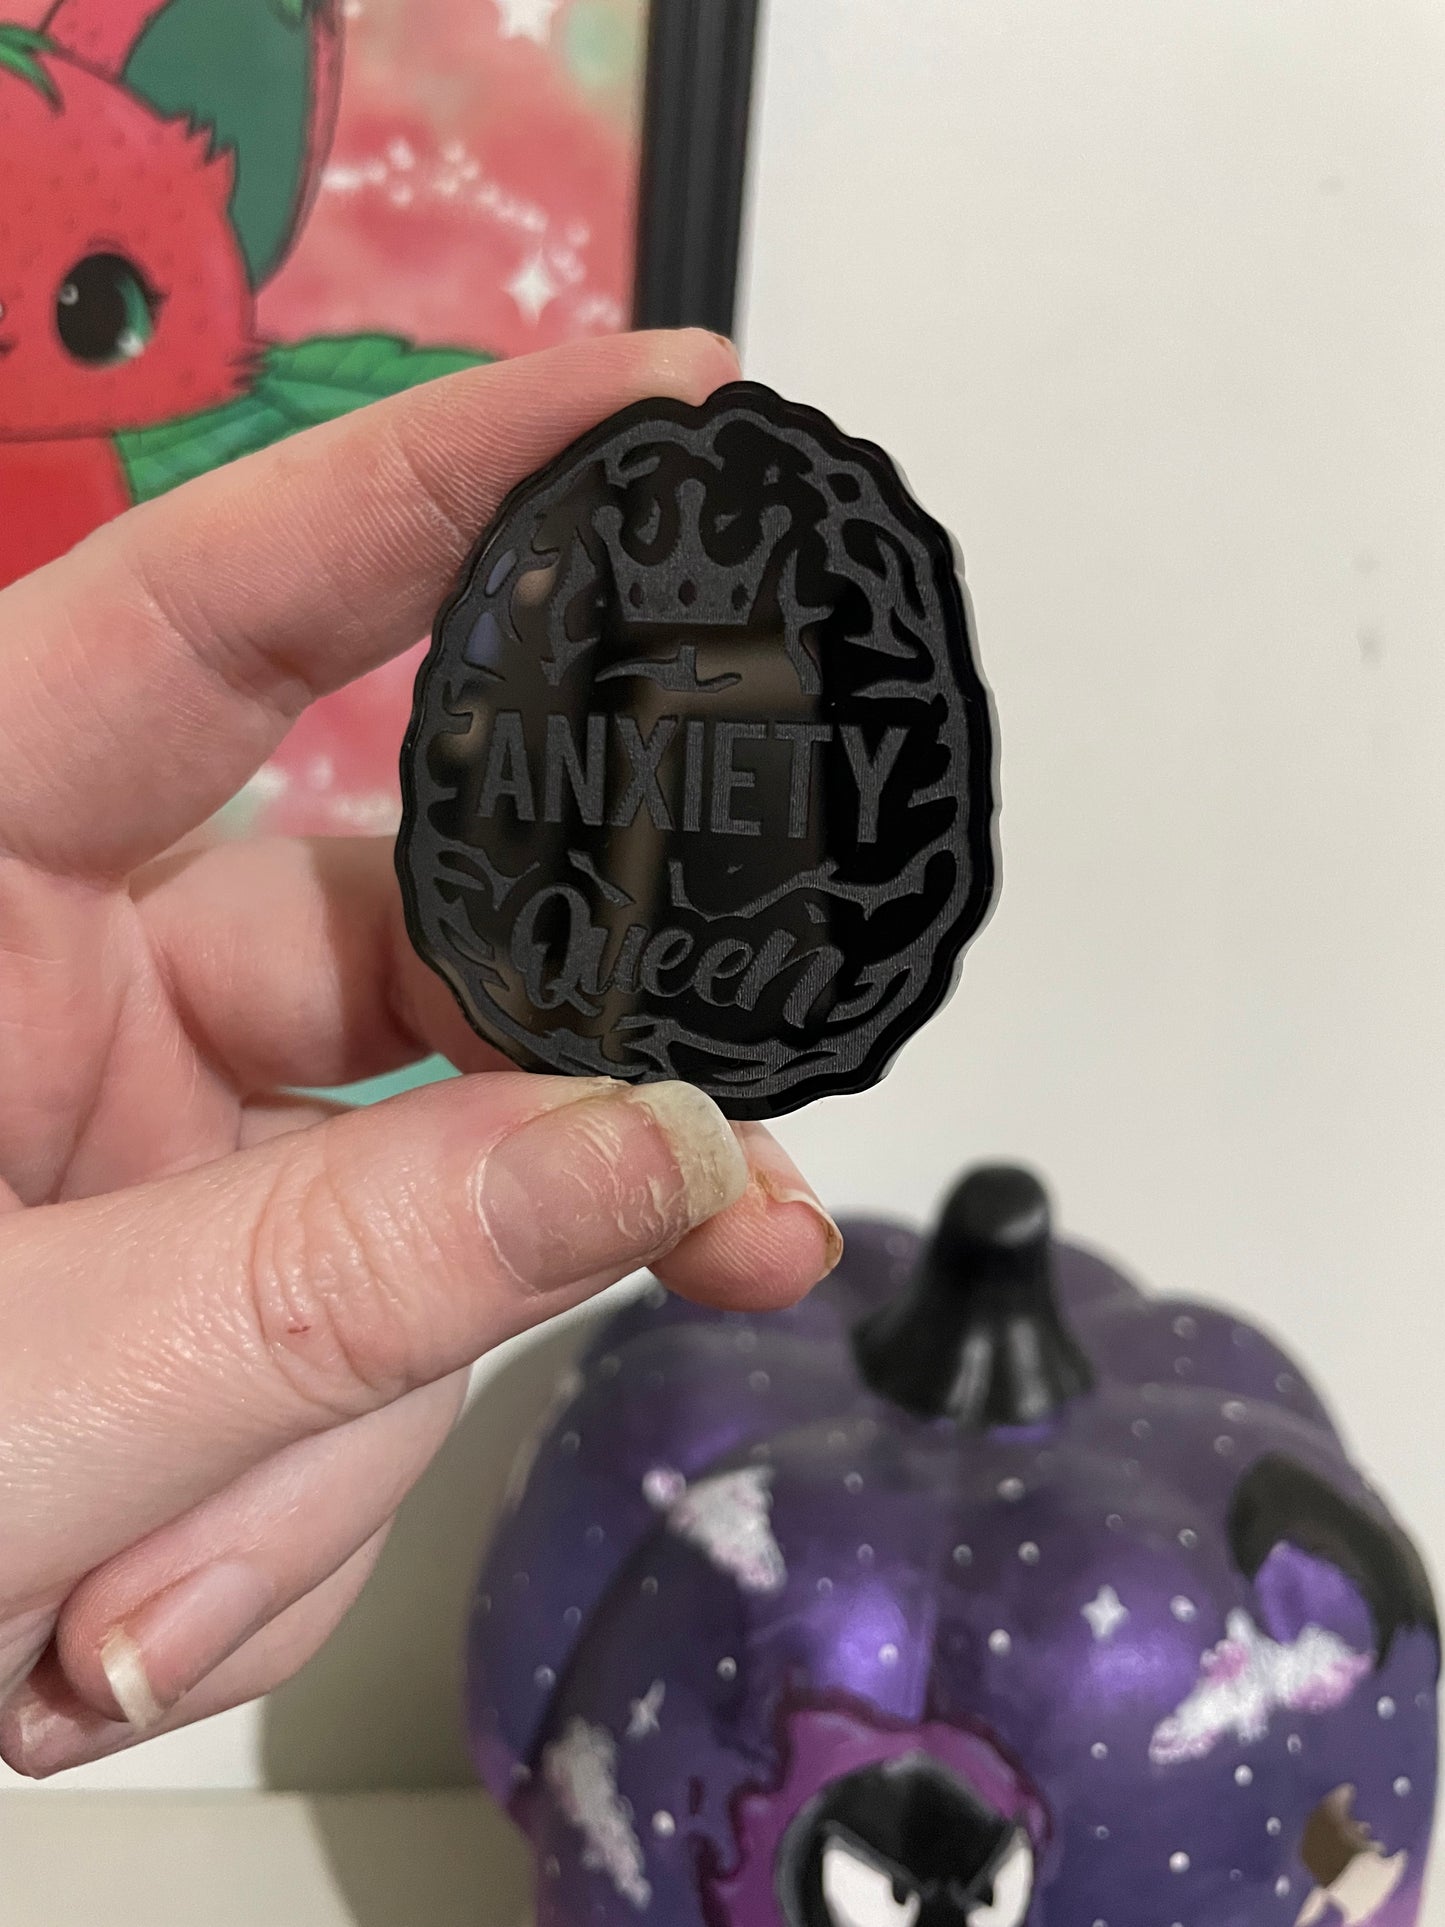 Anxiety Queen Mould